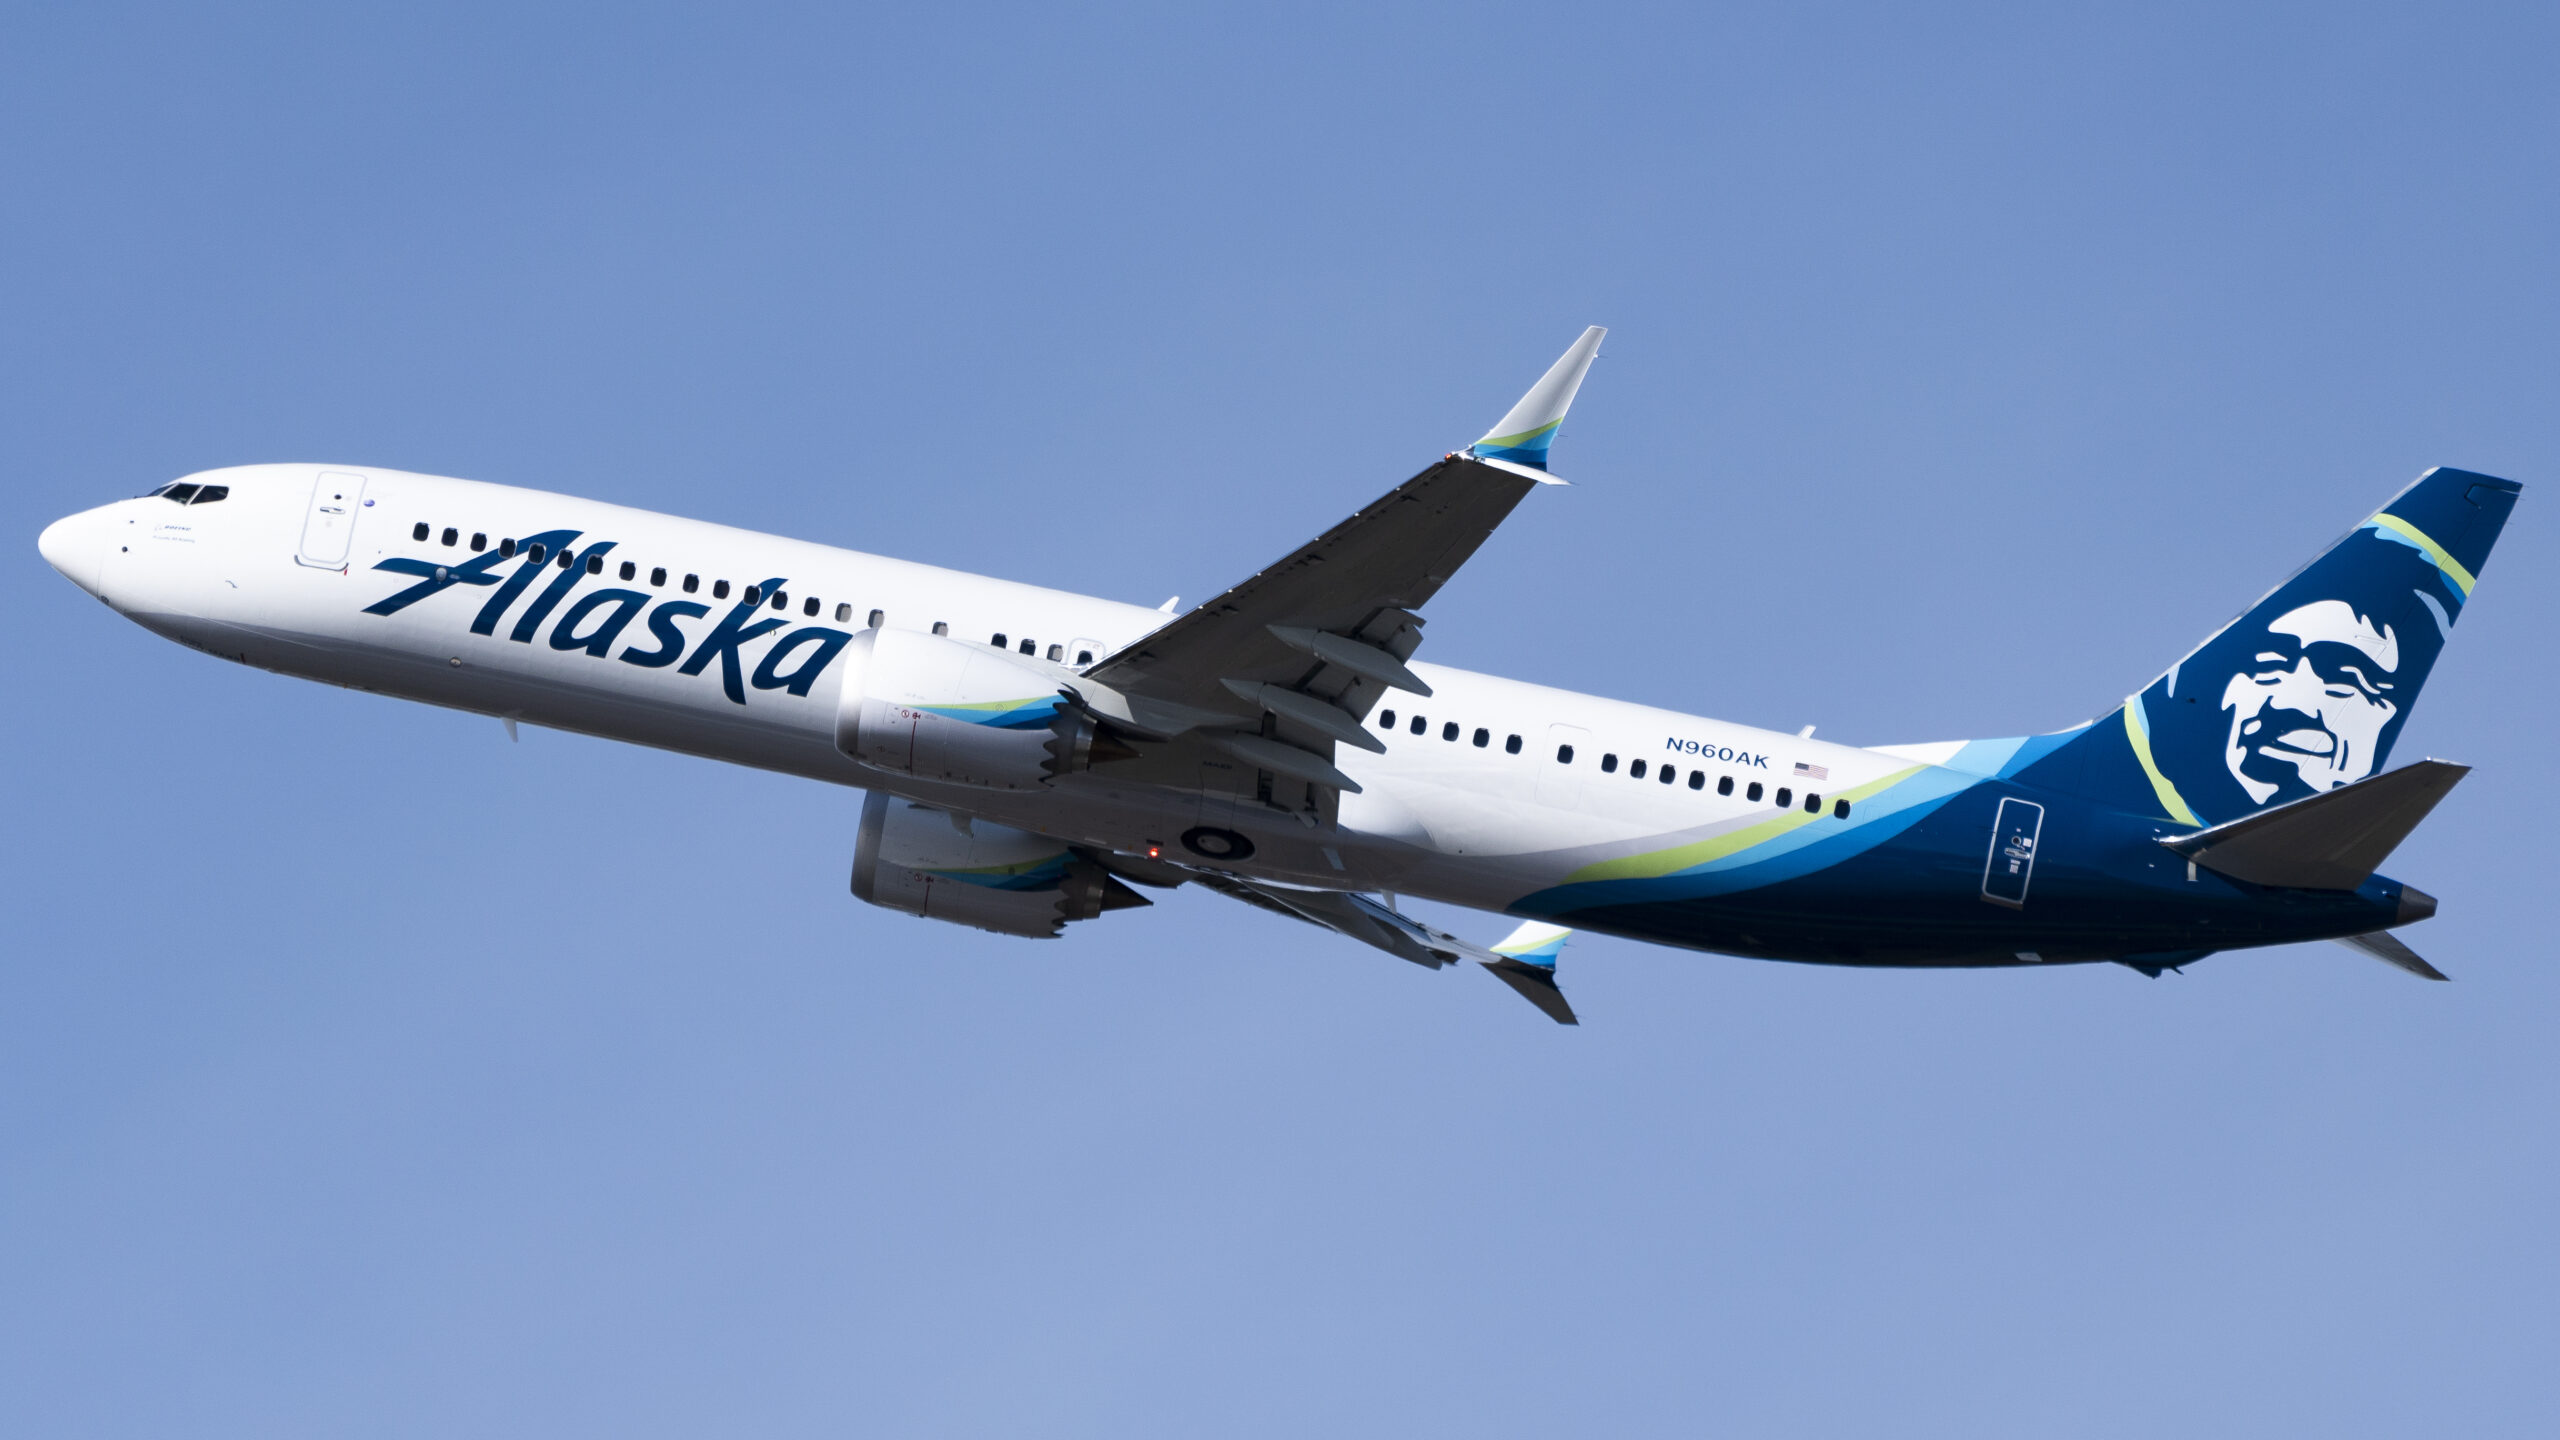 Alaska Airlines: FAA finds Boeing, Spirit AeroSystems failed to comply with manufacturing quality controls